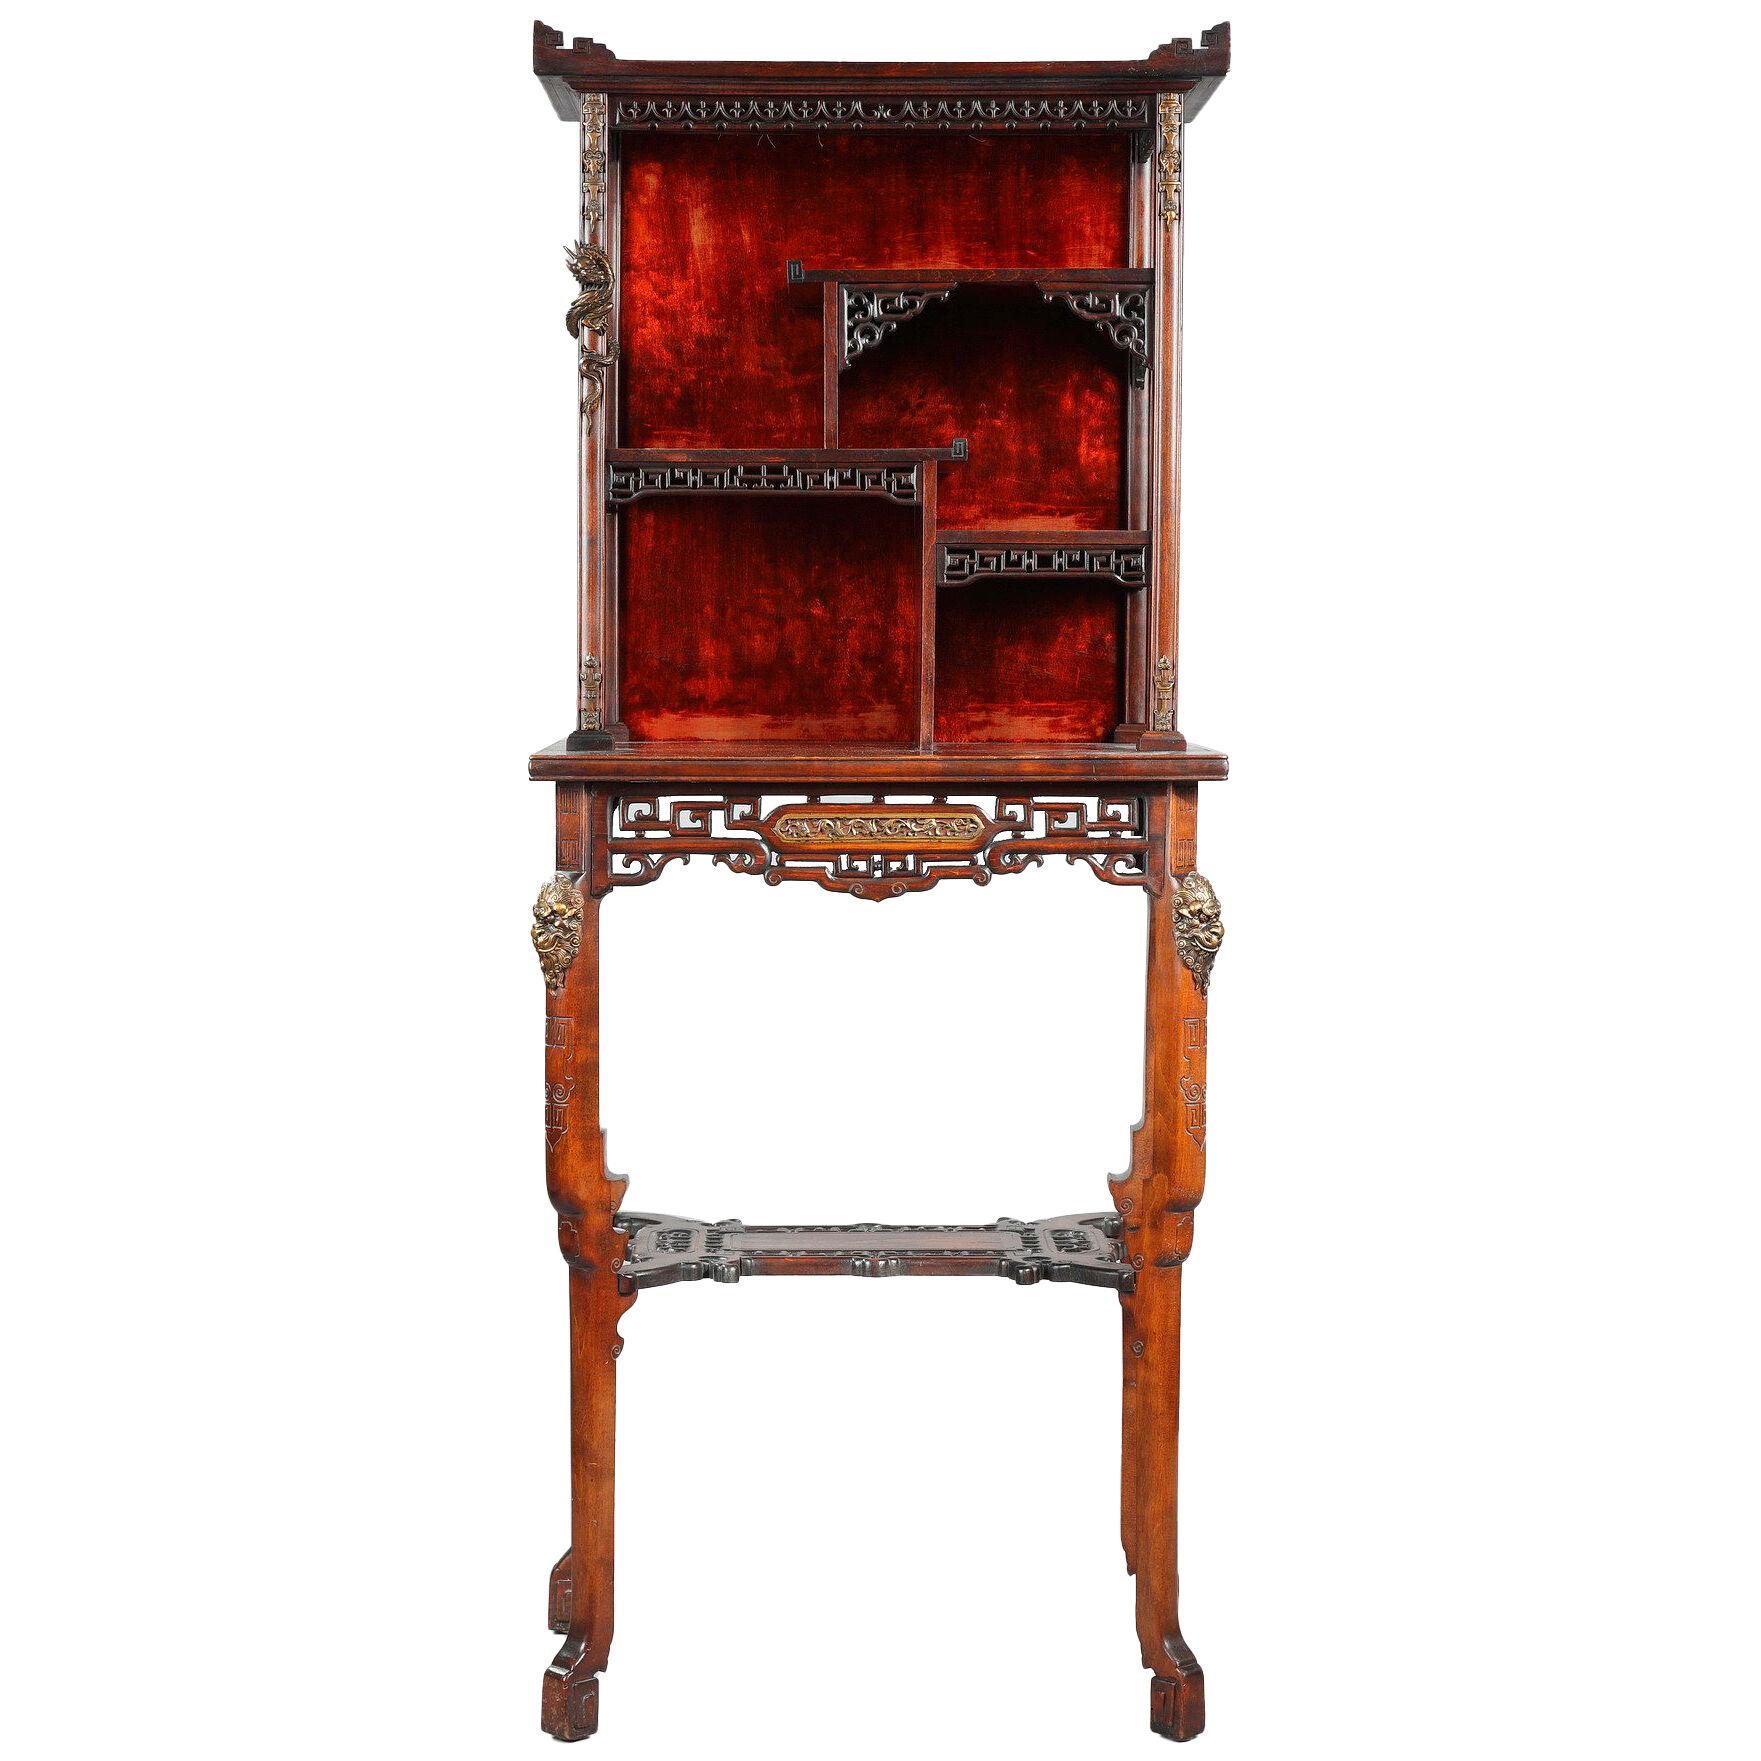  Aesthetic Movement Display Cabinet Attributed to G. Viardot, France, circa 1880